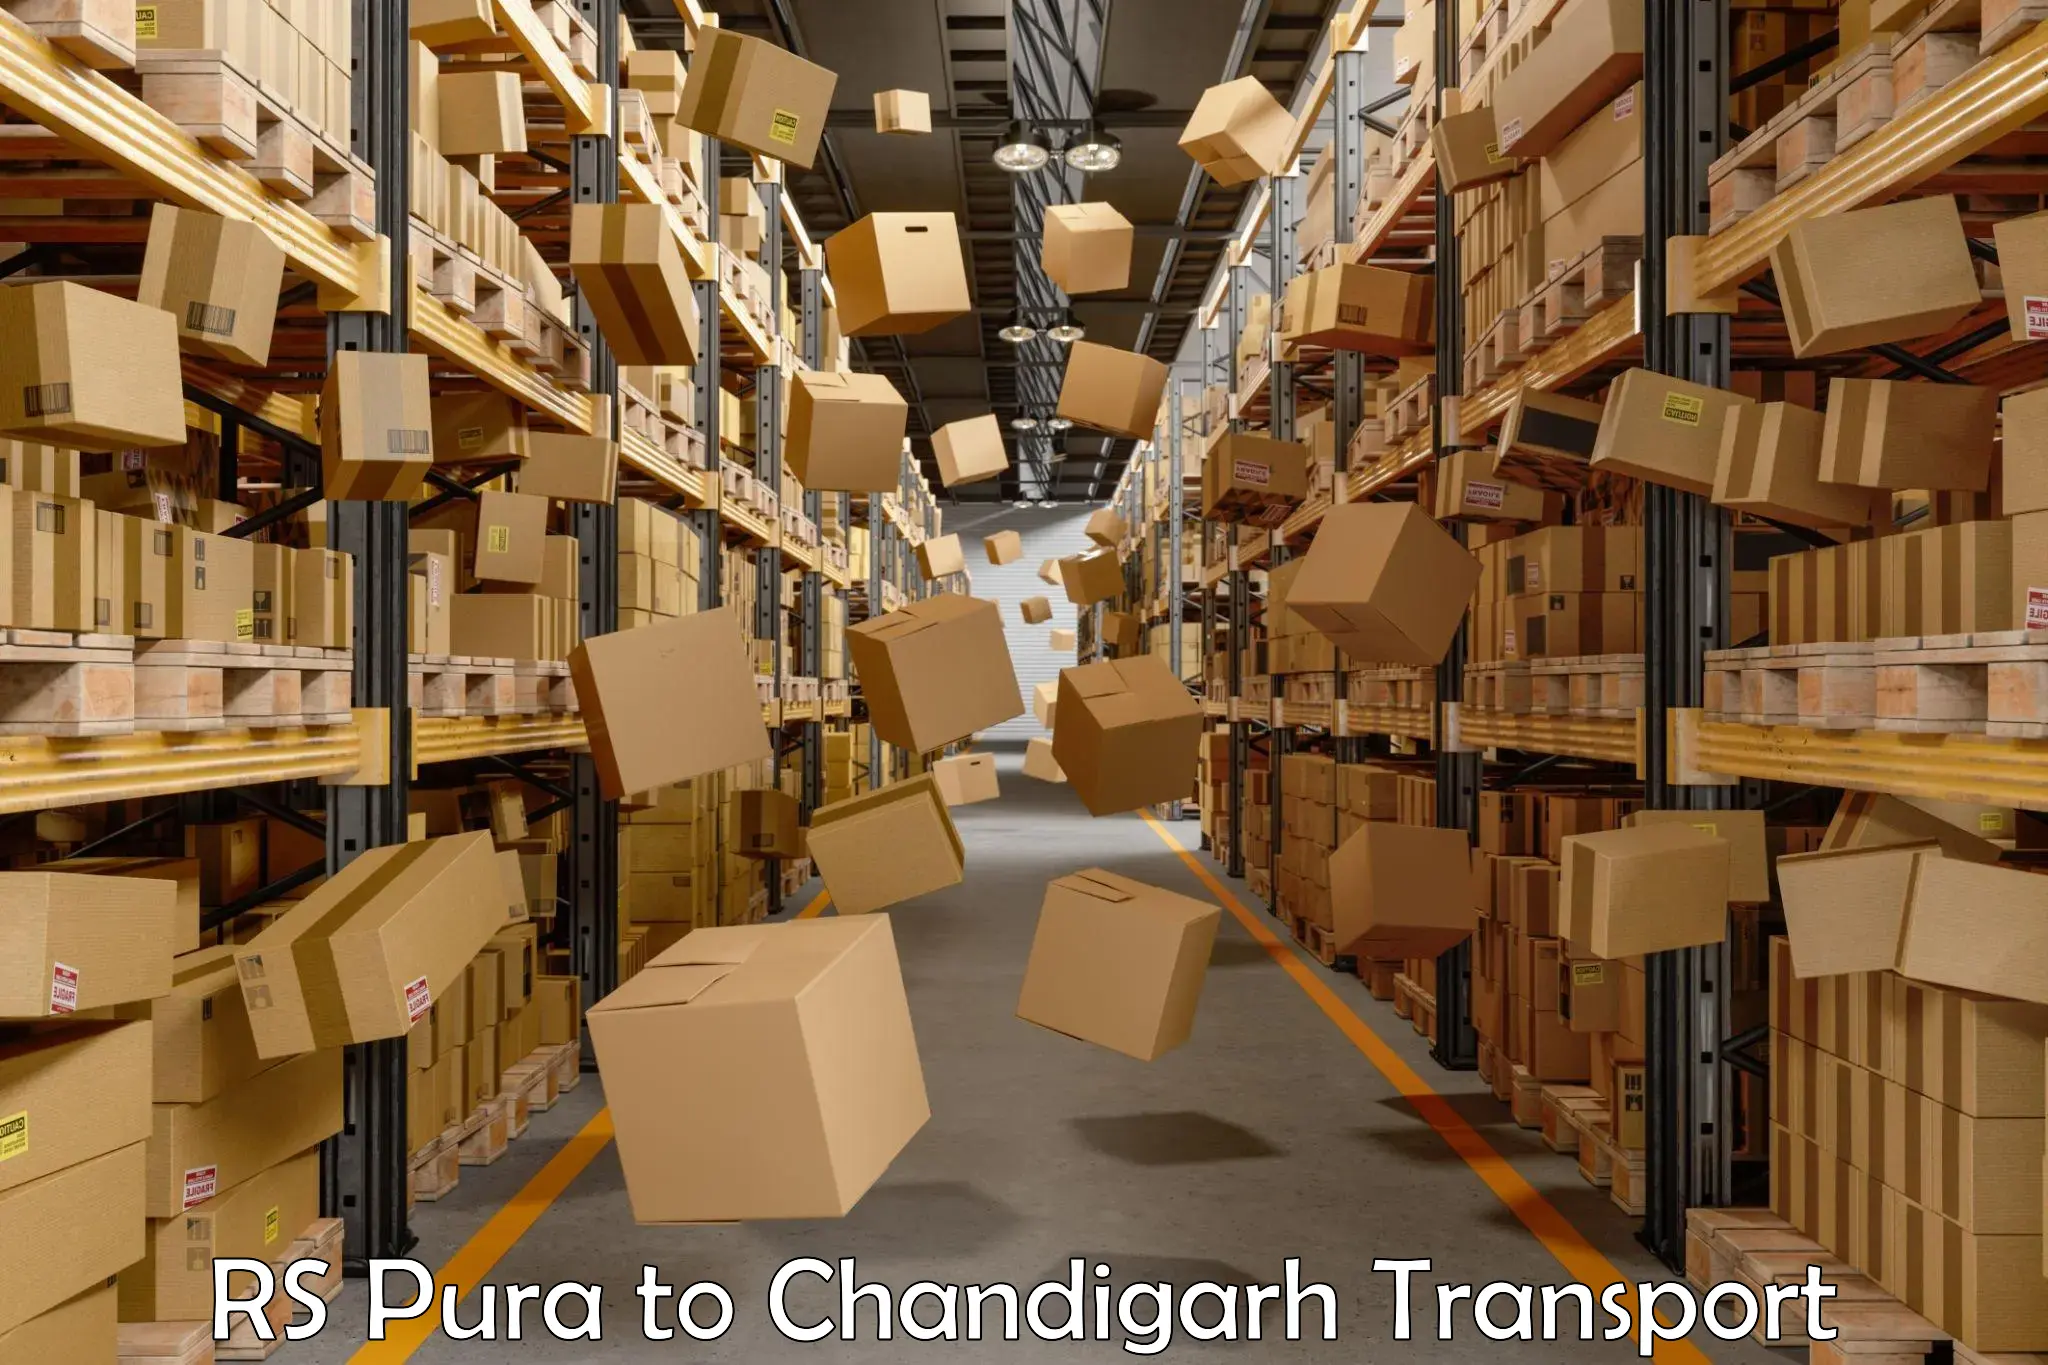 Air freight transport services RS Pura to Chandigarh